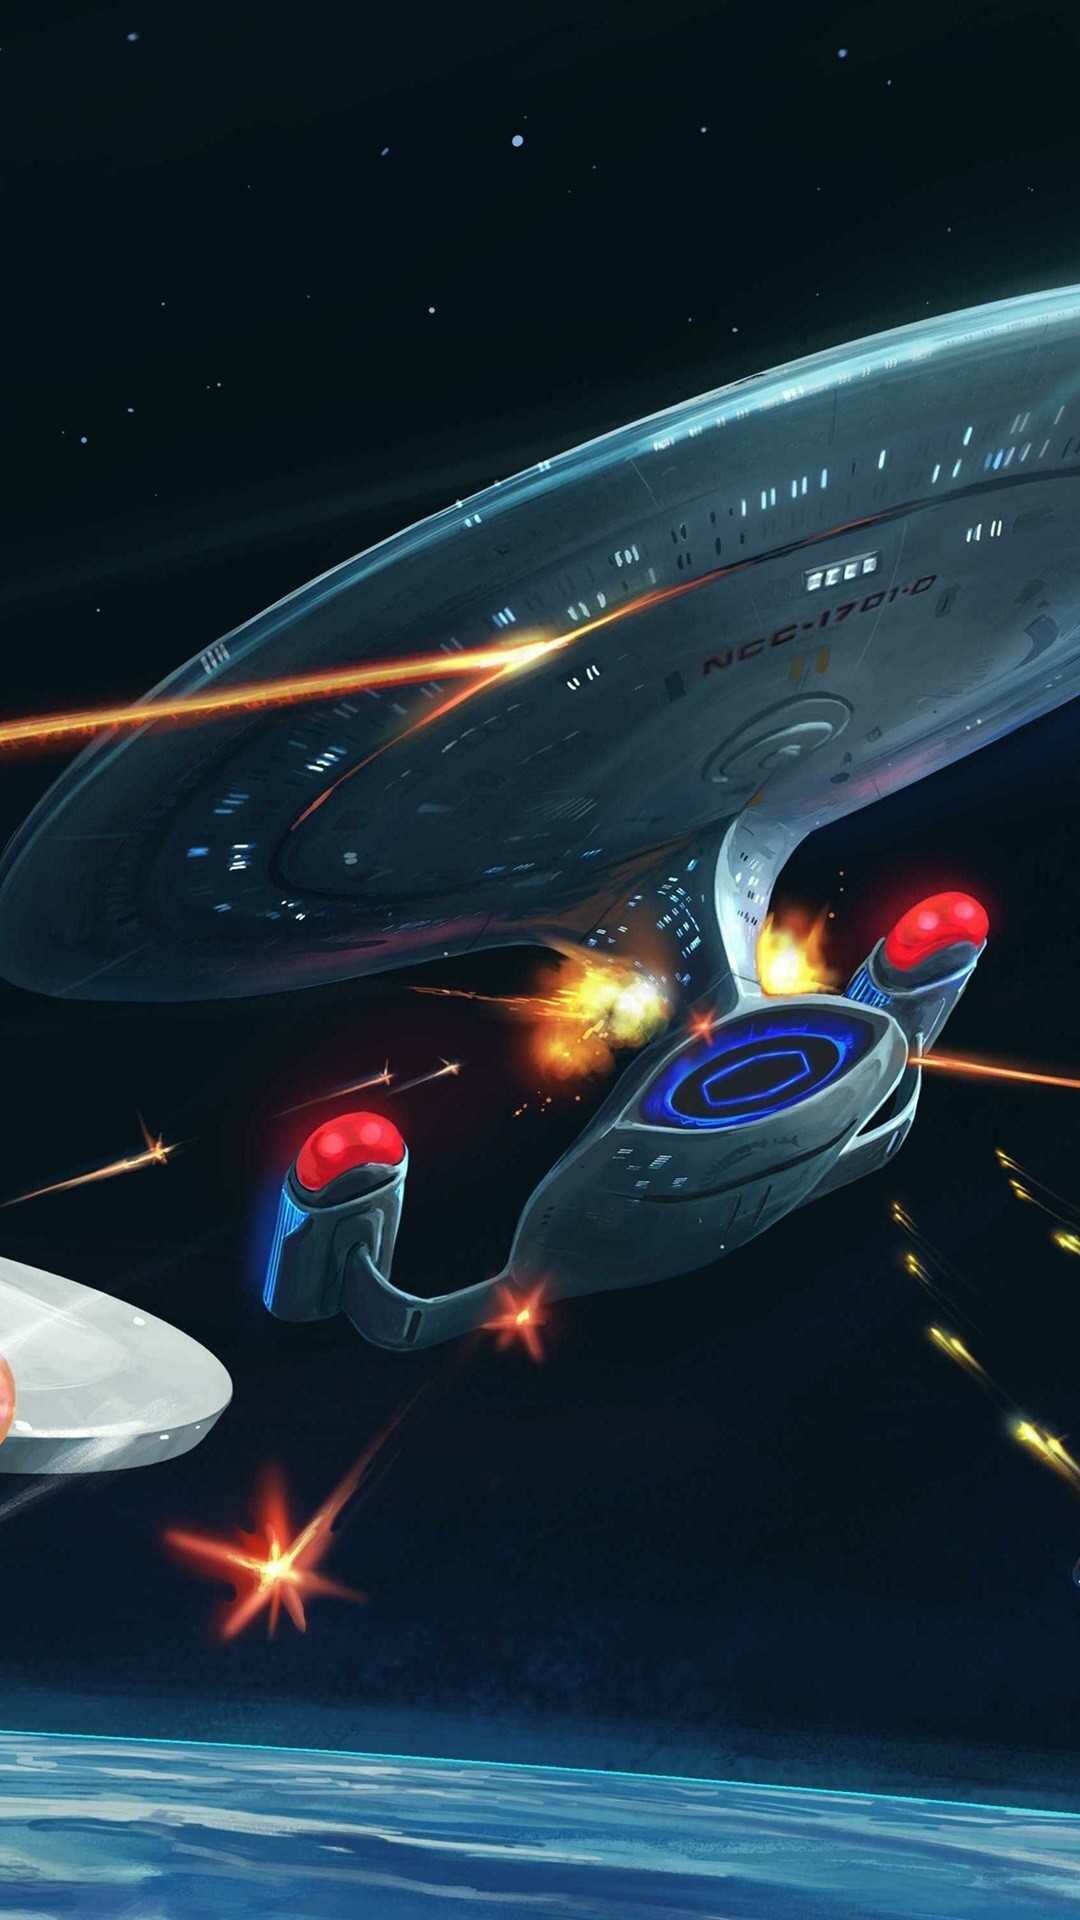 Star Trek: American television science-fiction series that ran on NBC for only three seasons but that became one of the most popular brands in the American entertainment industry. 1080x1920 Full HD Background.